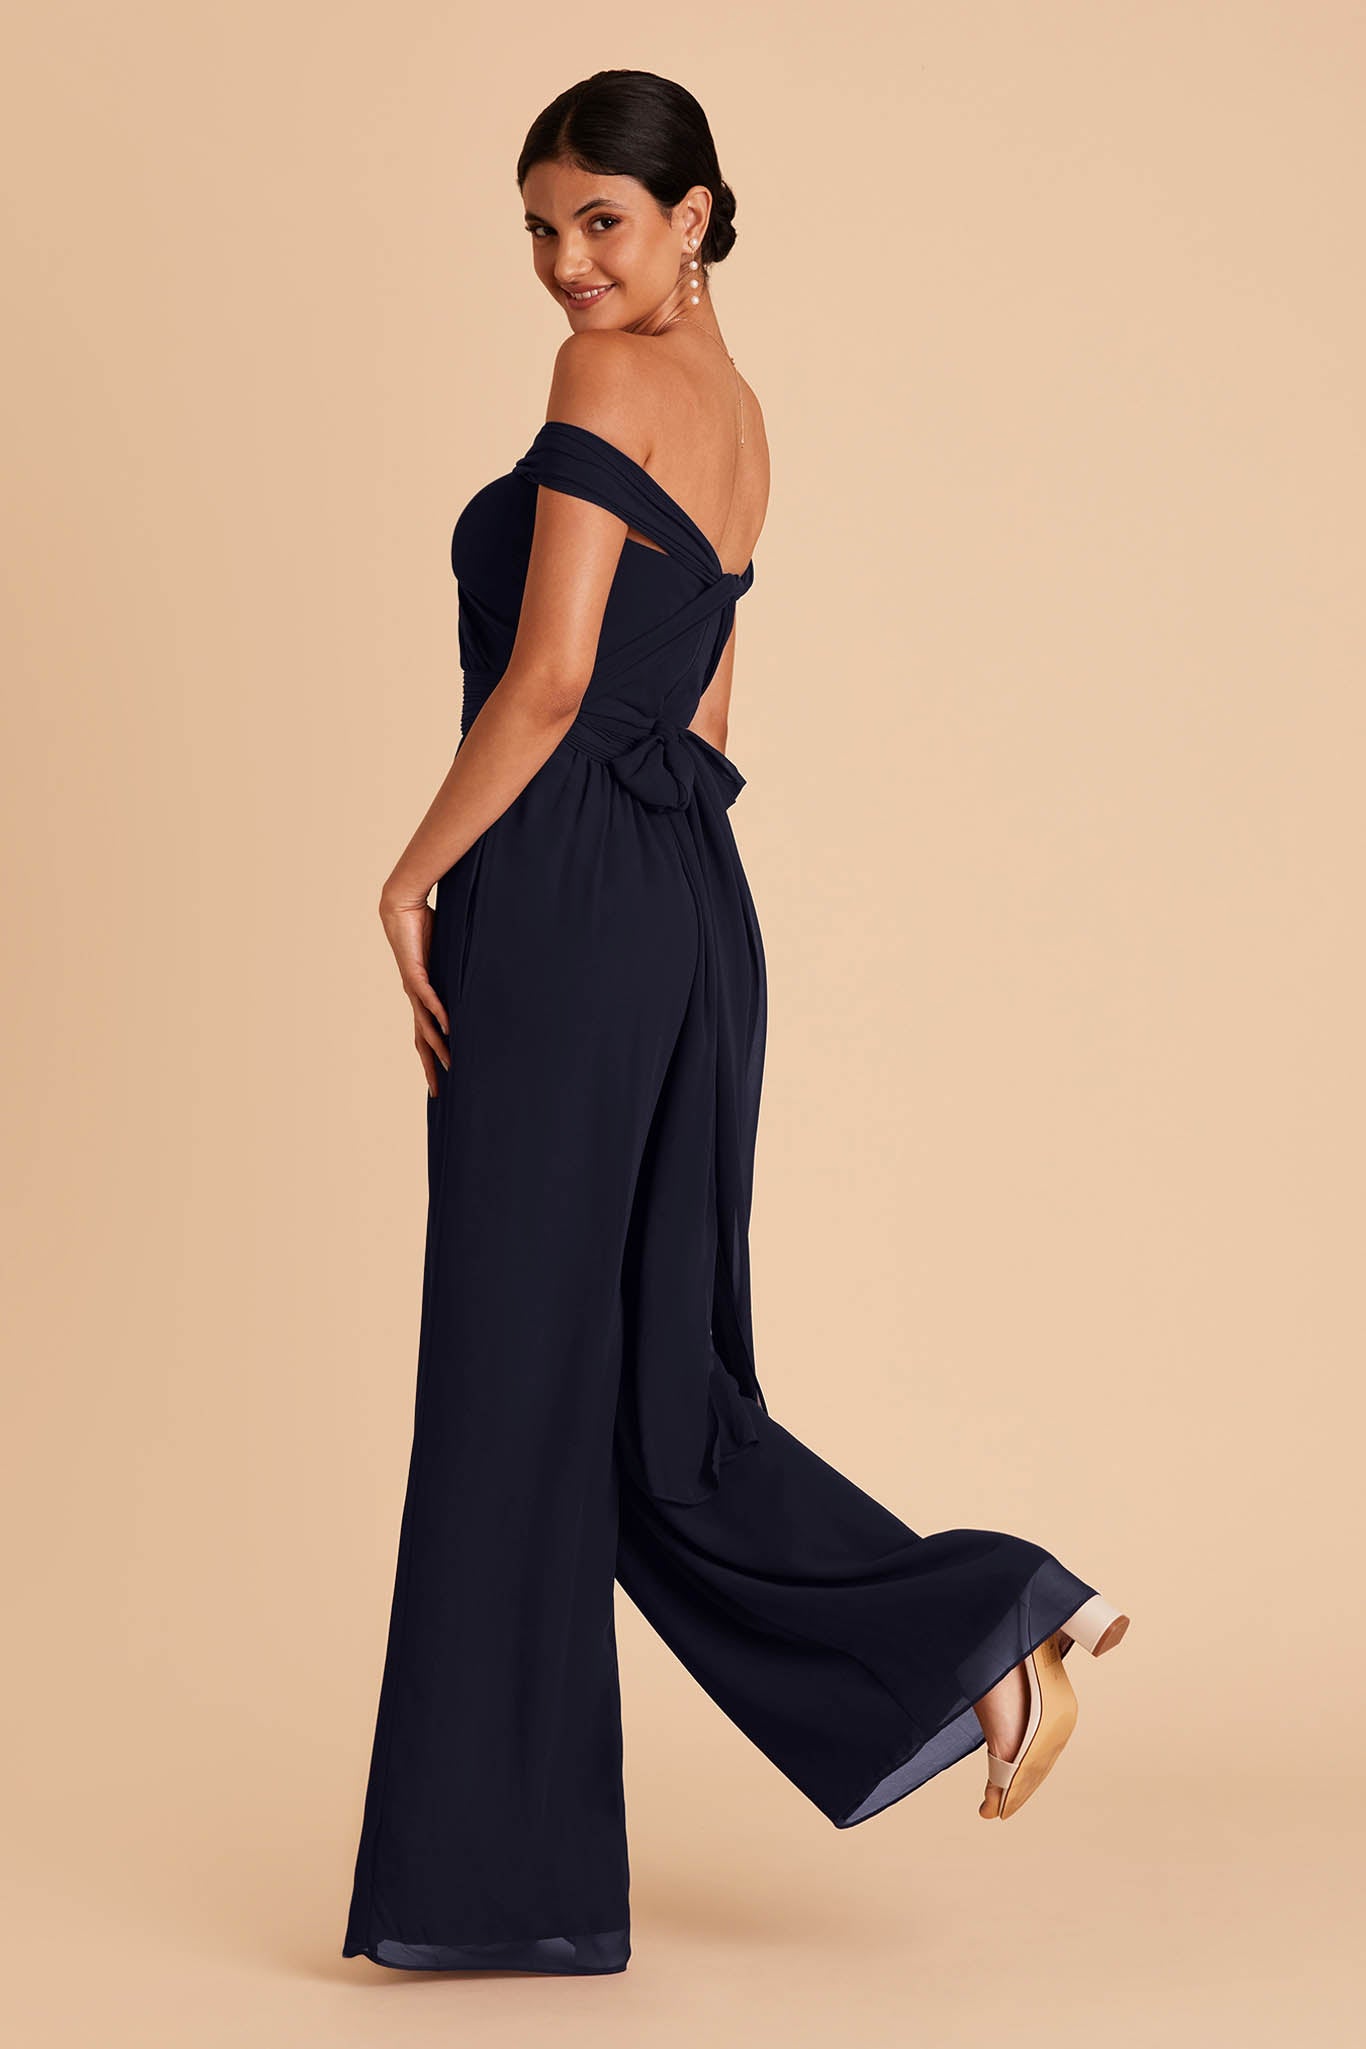 Navy blue wedding jumpsuit with sweetheart bodice with convertible neckline and tie in the back